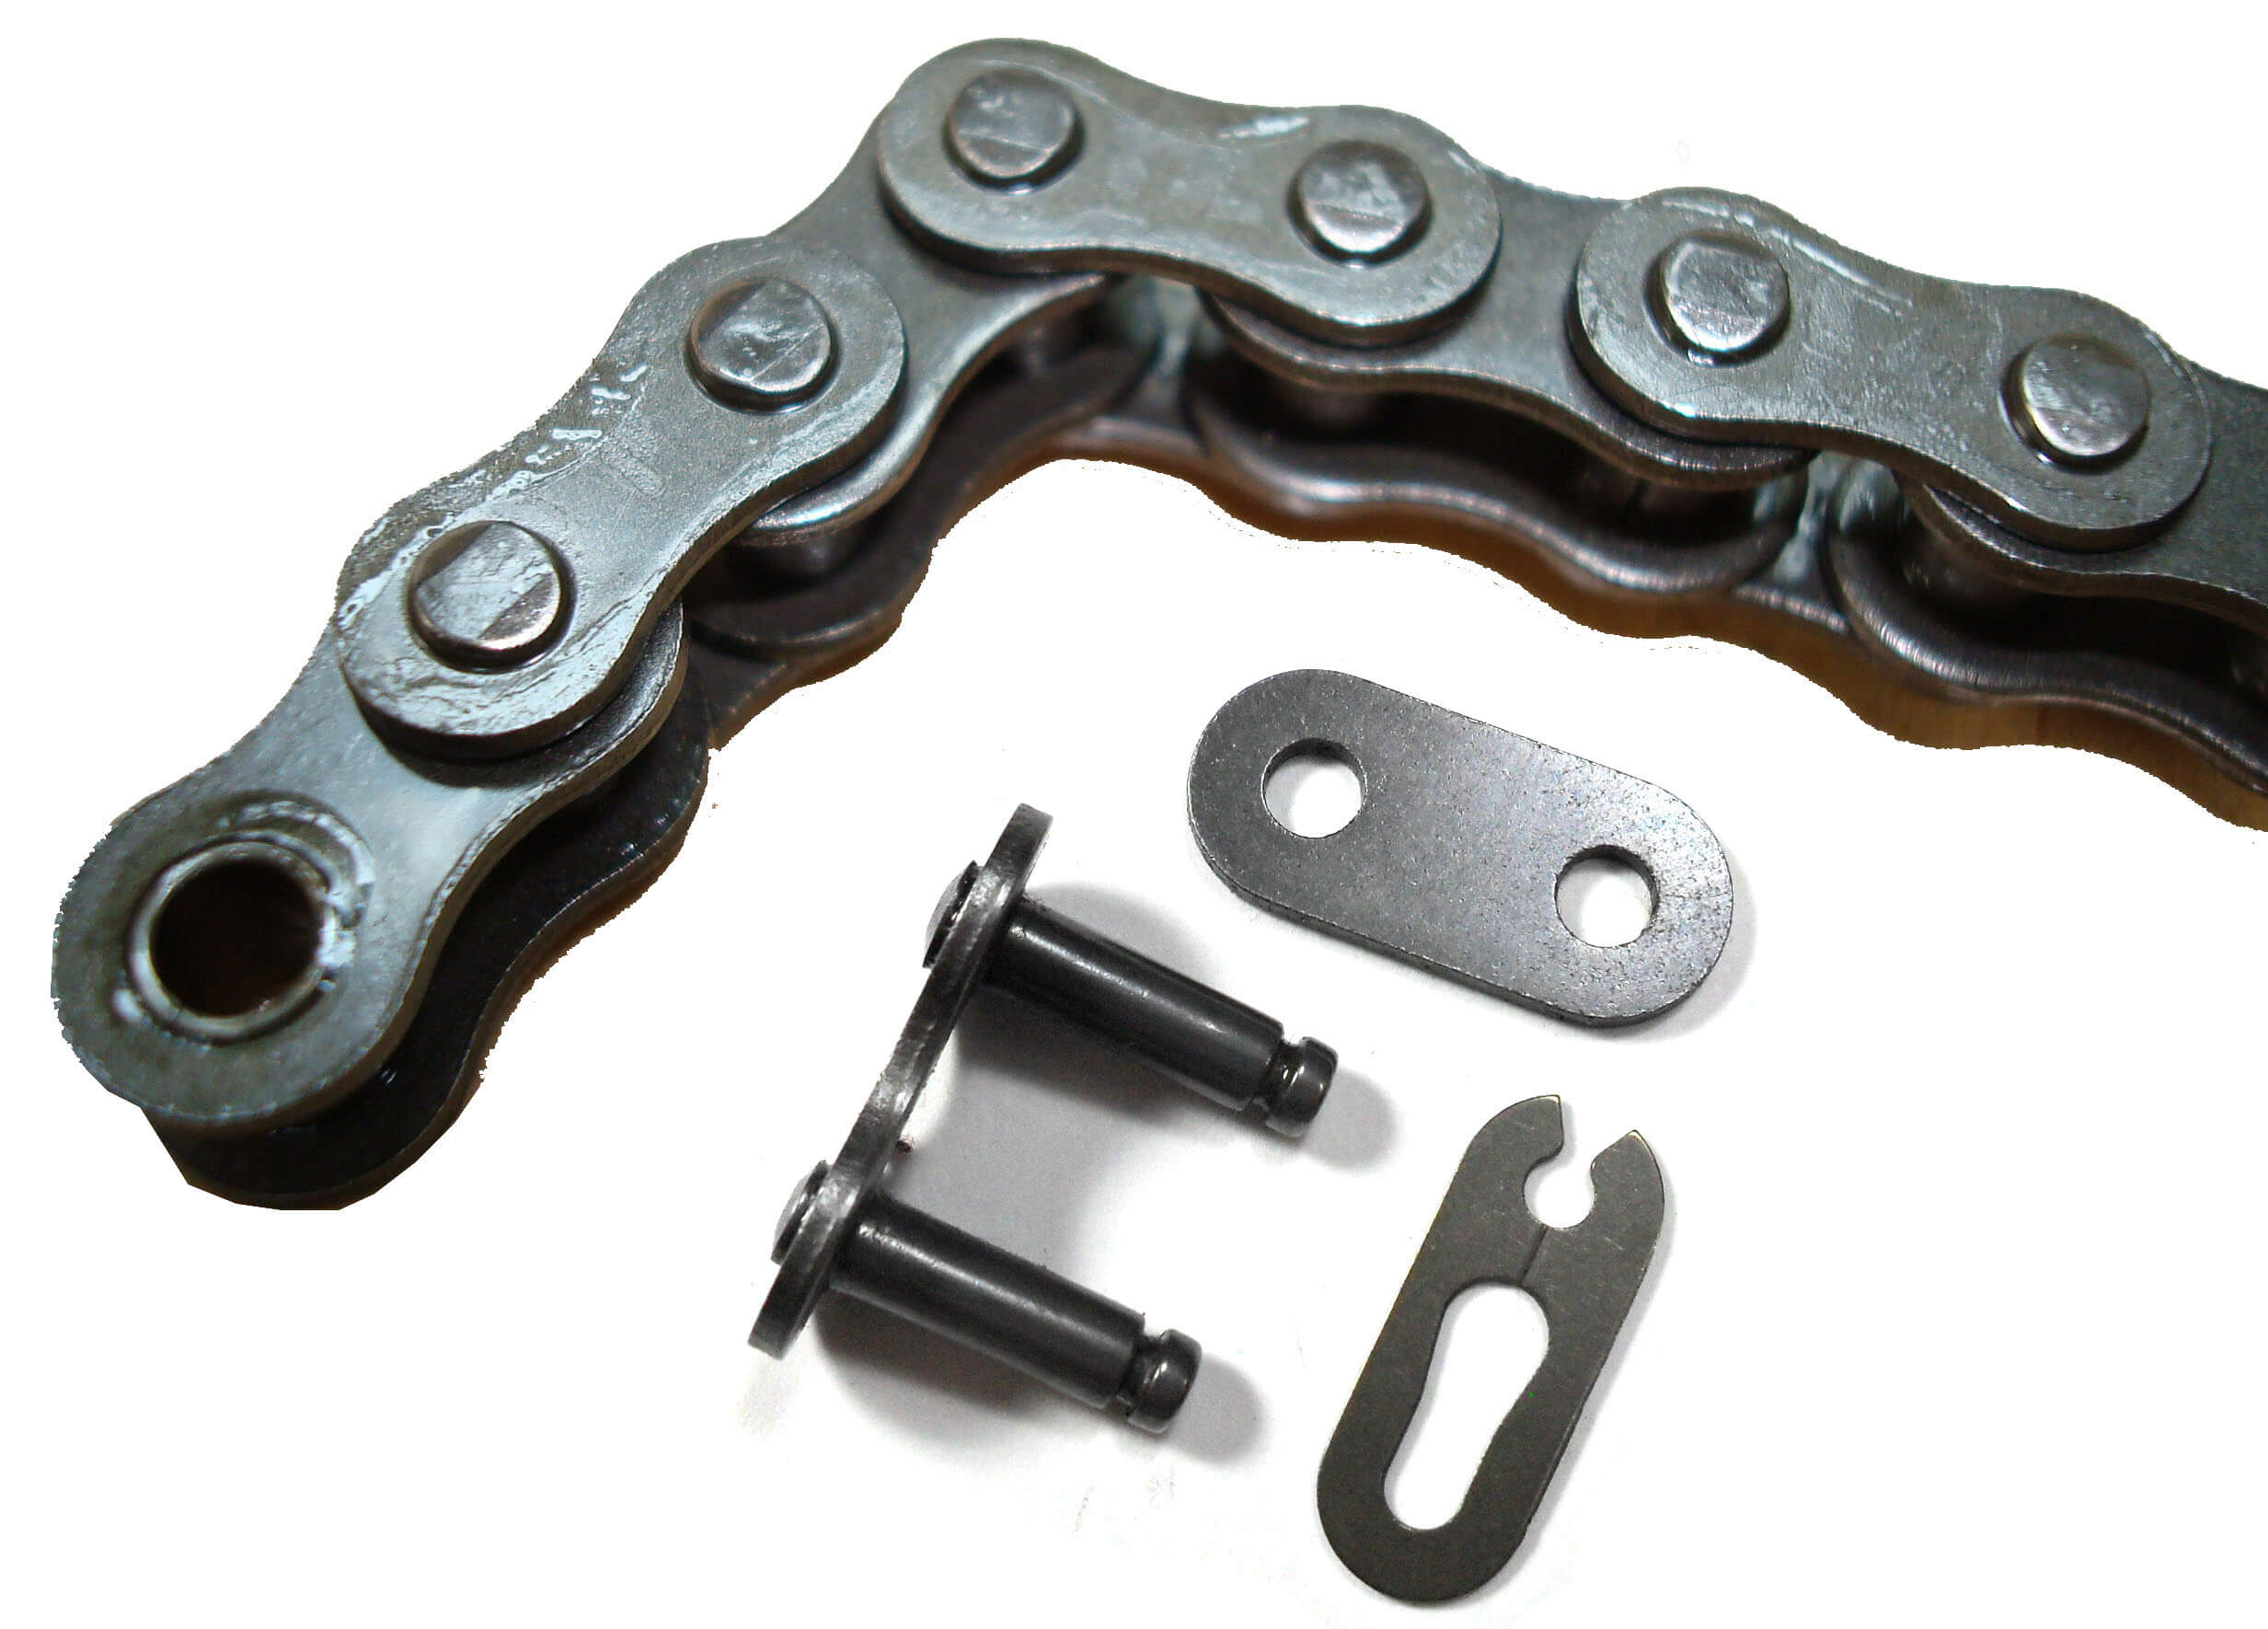 Chain #35 x 50L With Master Link Fits Coleman CK100, GK80, Motovox, + other small GoKarts-Mini Bikes